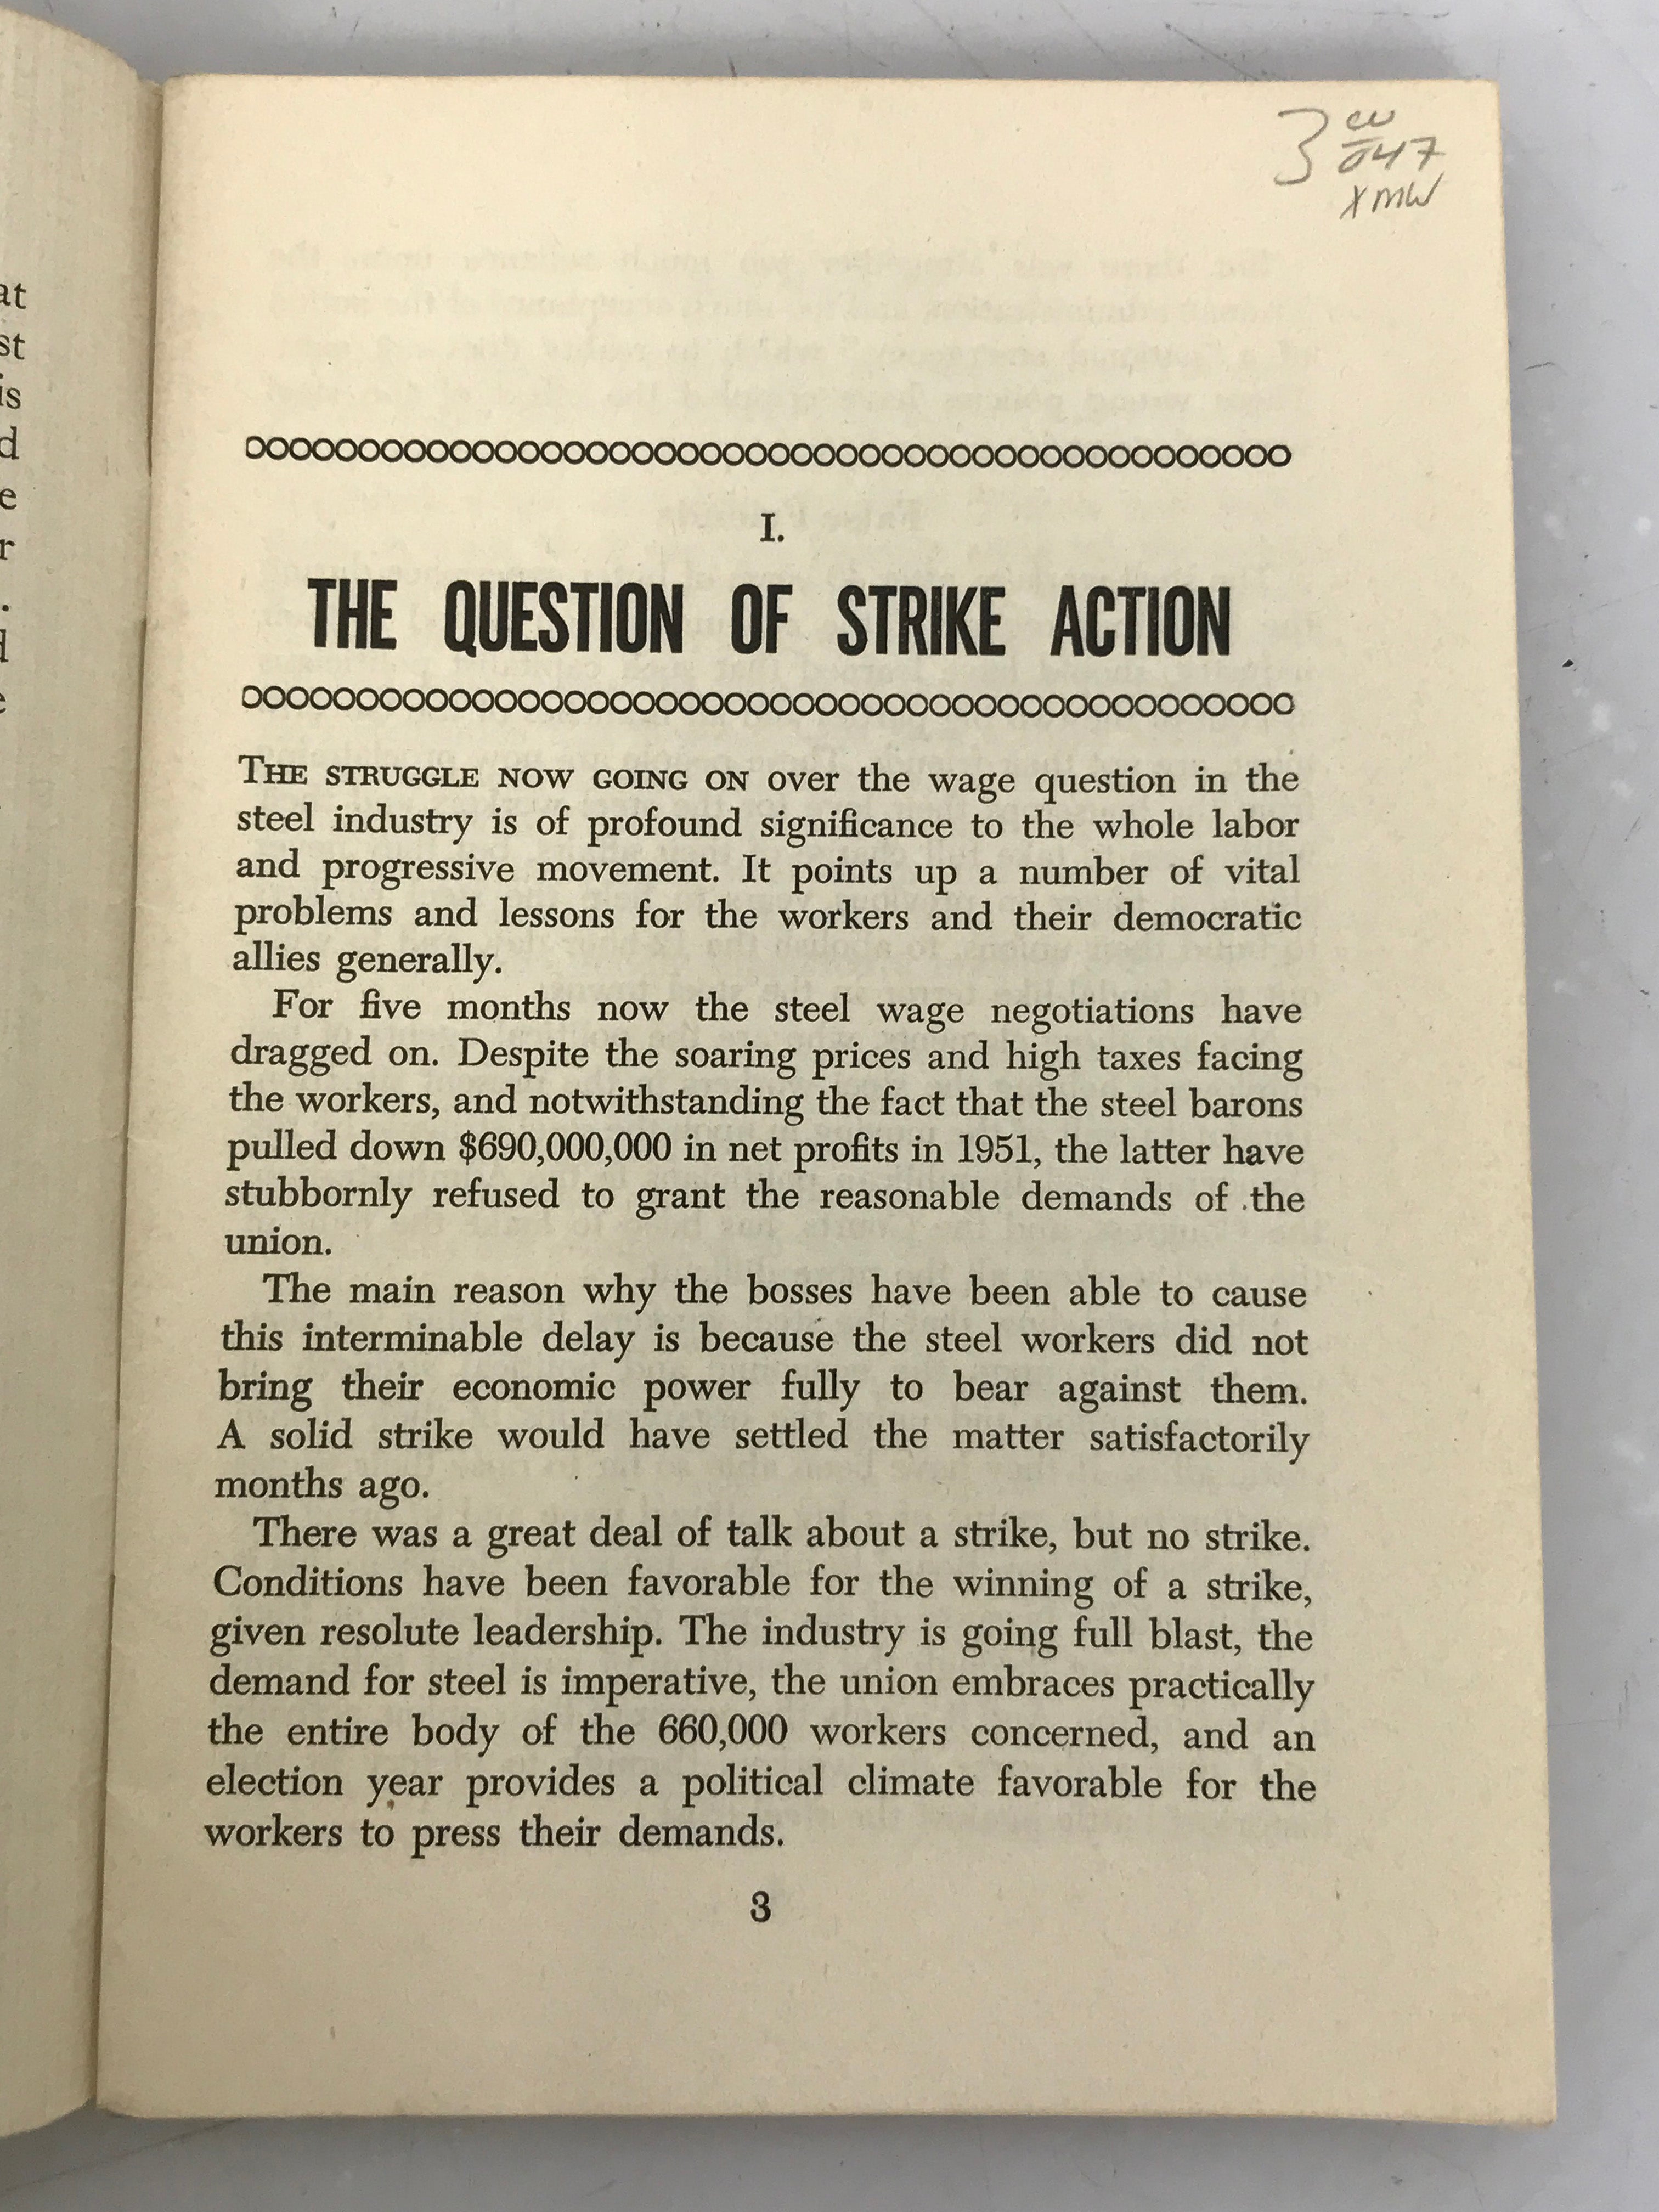 The Steel Workers and the Fight for Labor's Rights by William Z. Foster 1952 SC